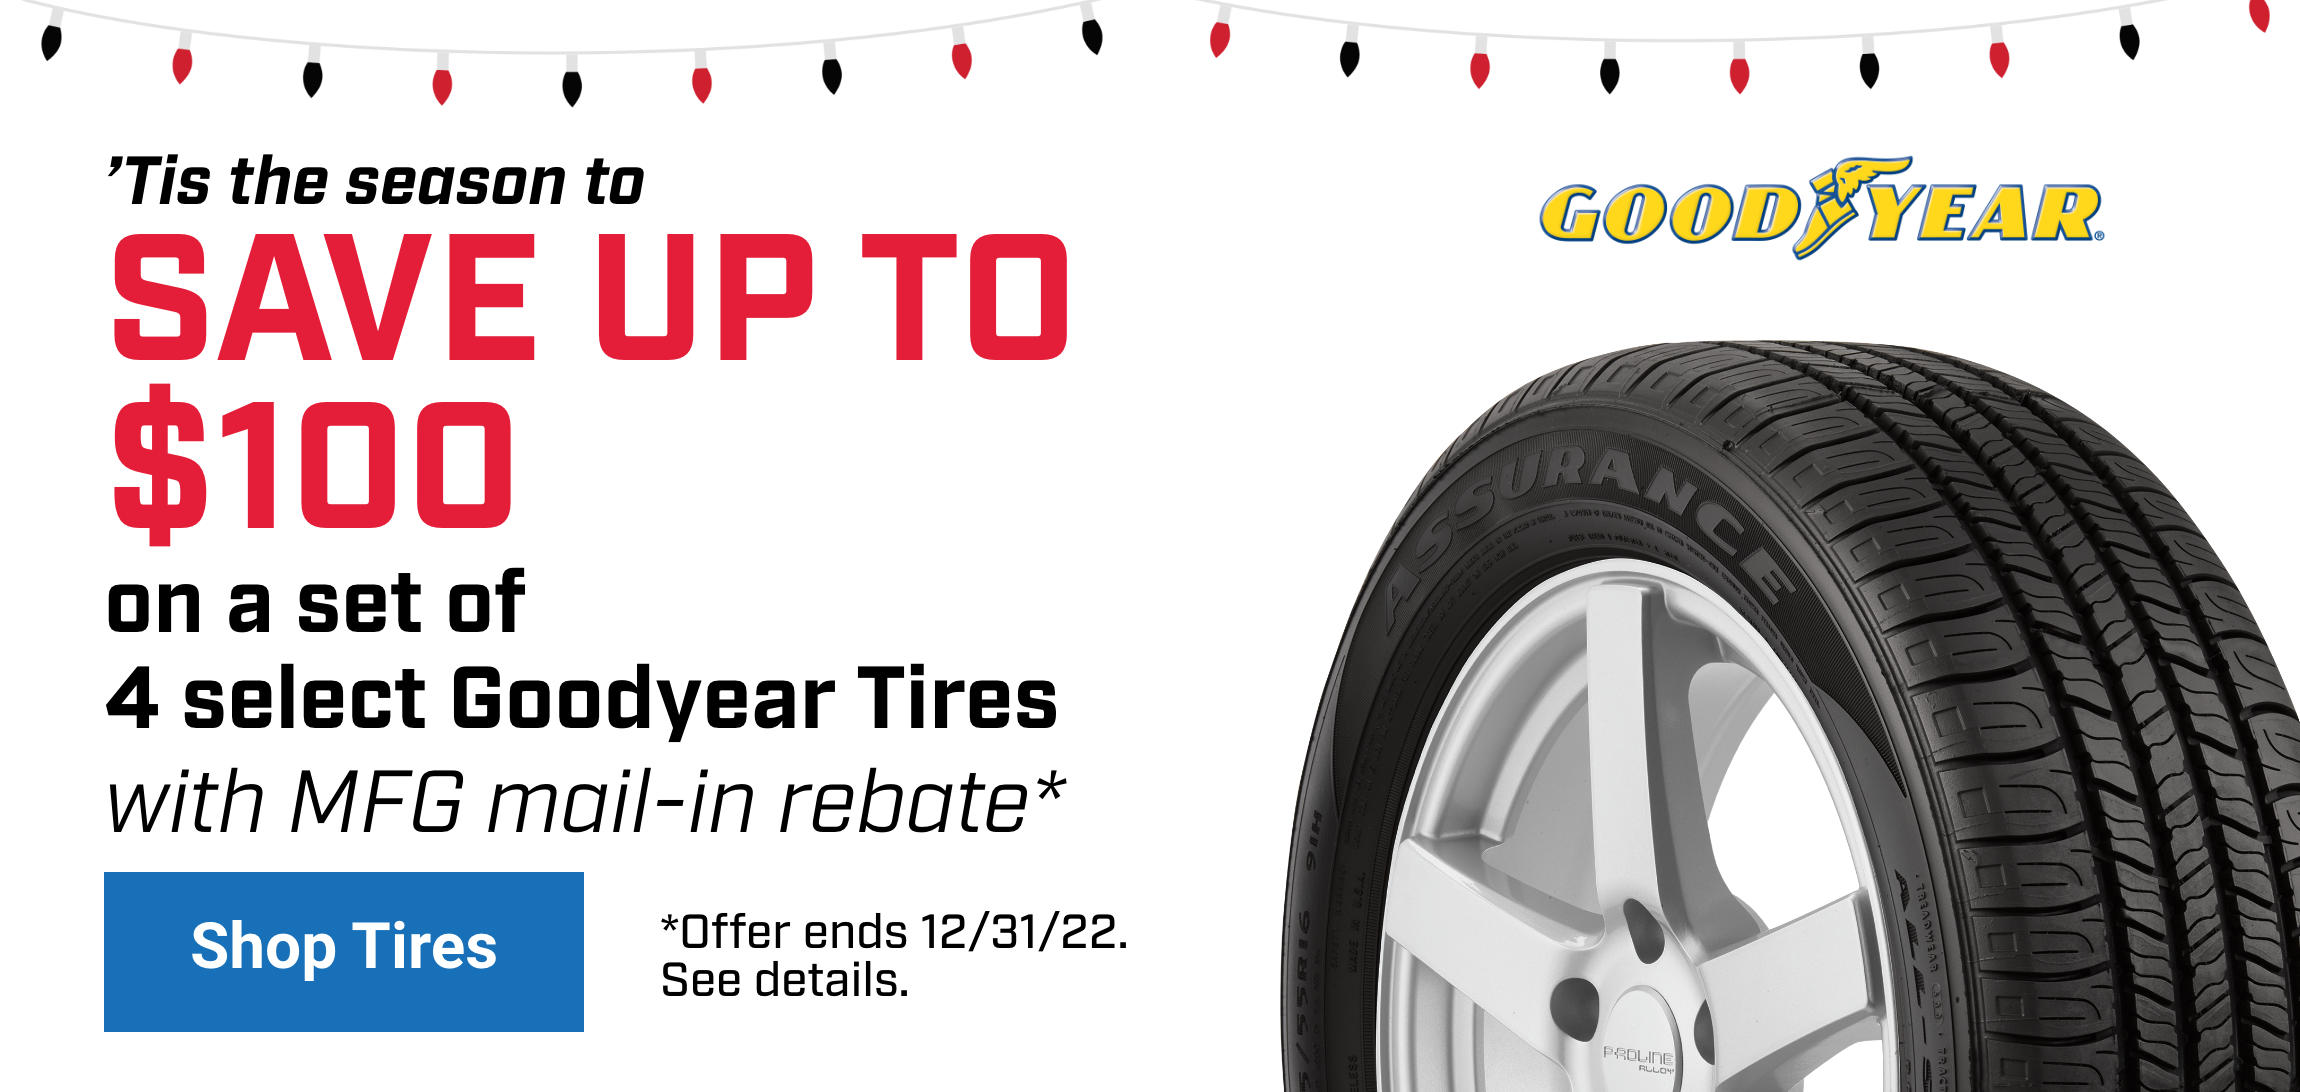 Save on $100 GoodYear Tires